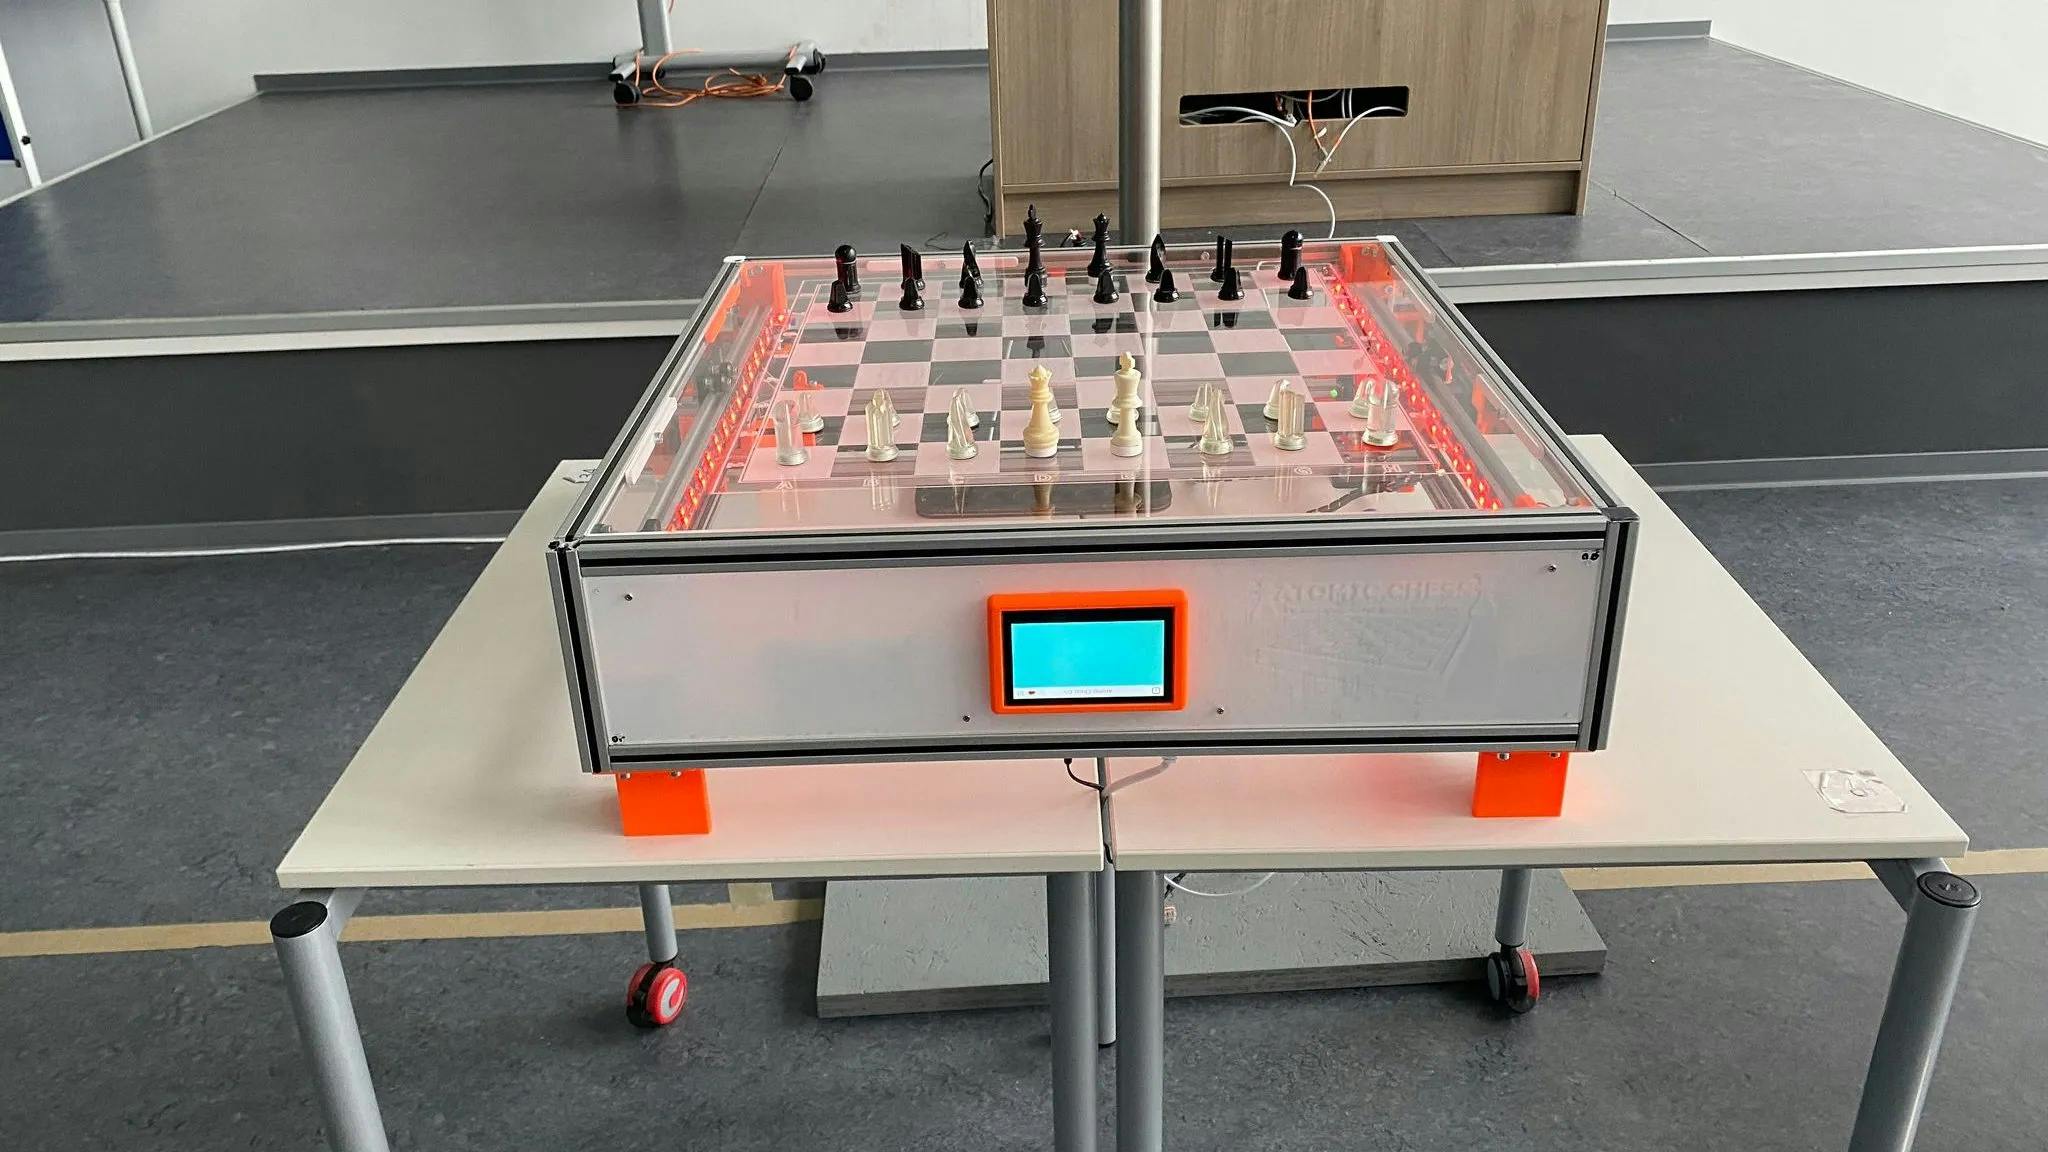 Automated Chess 